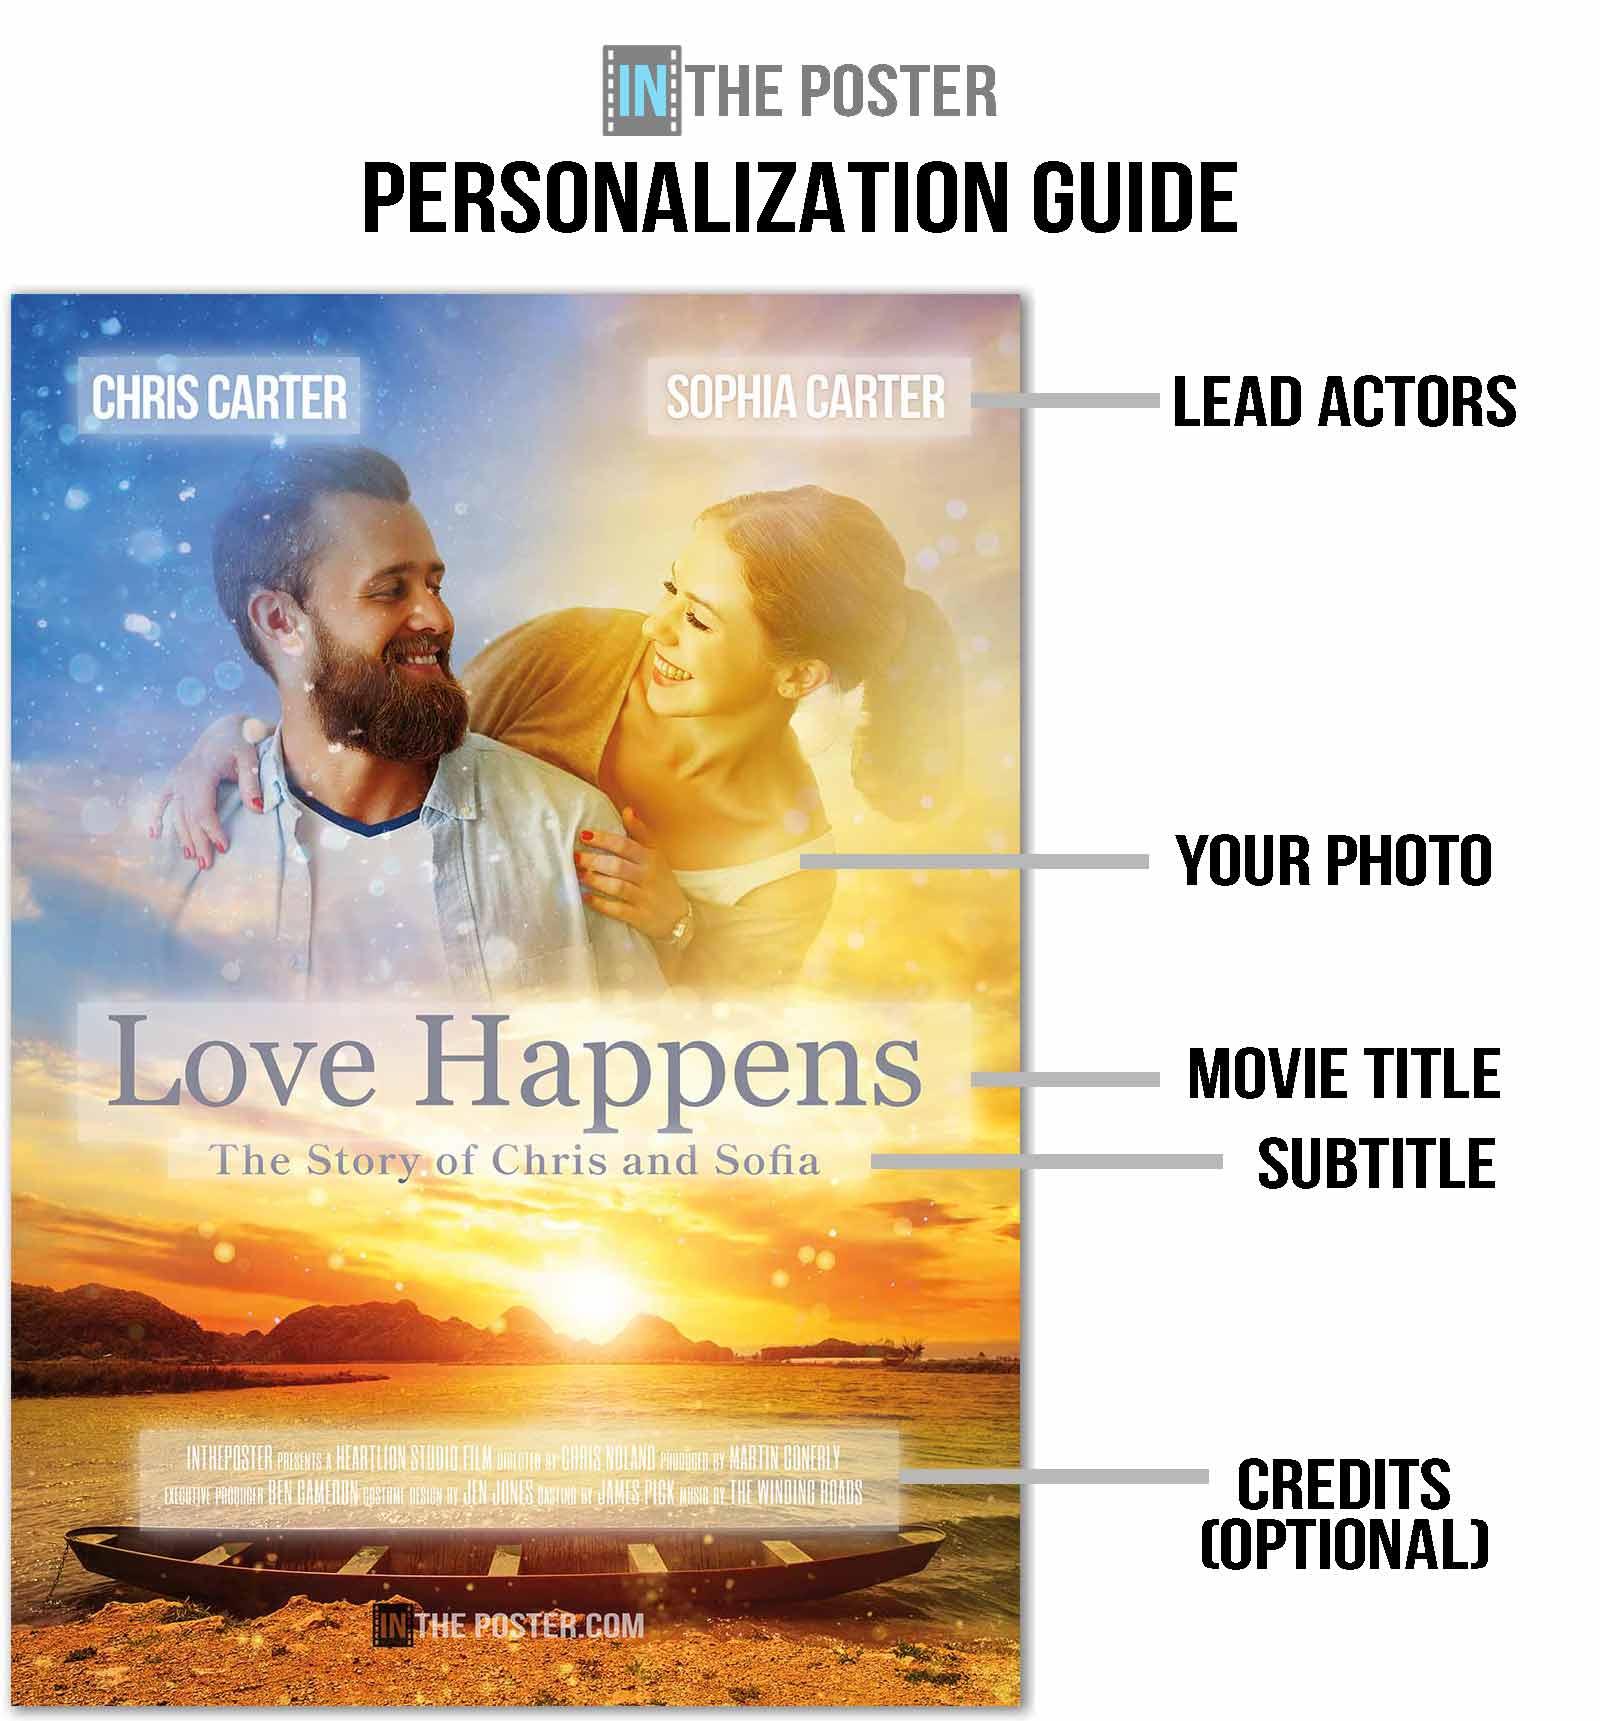 A diagram showing how to personalize the romantic Love Happens Boxer movie poster design